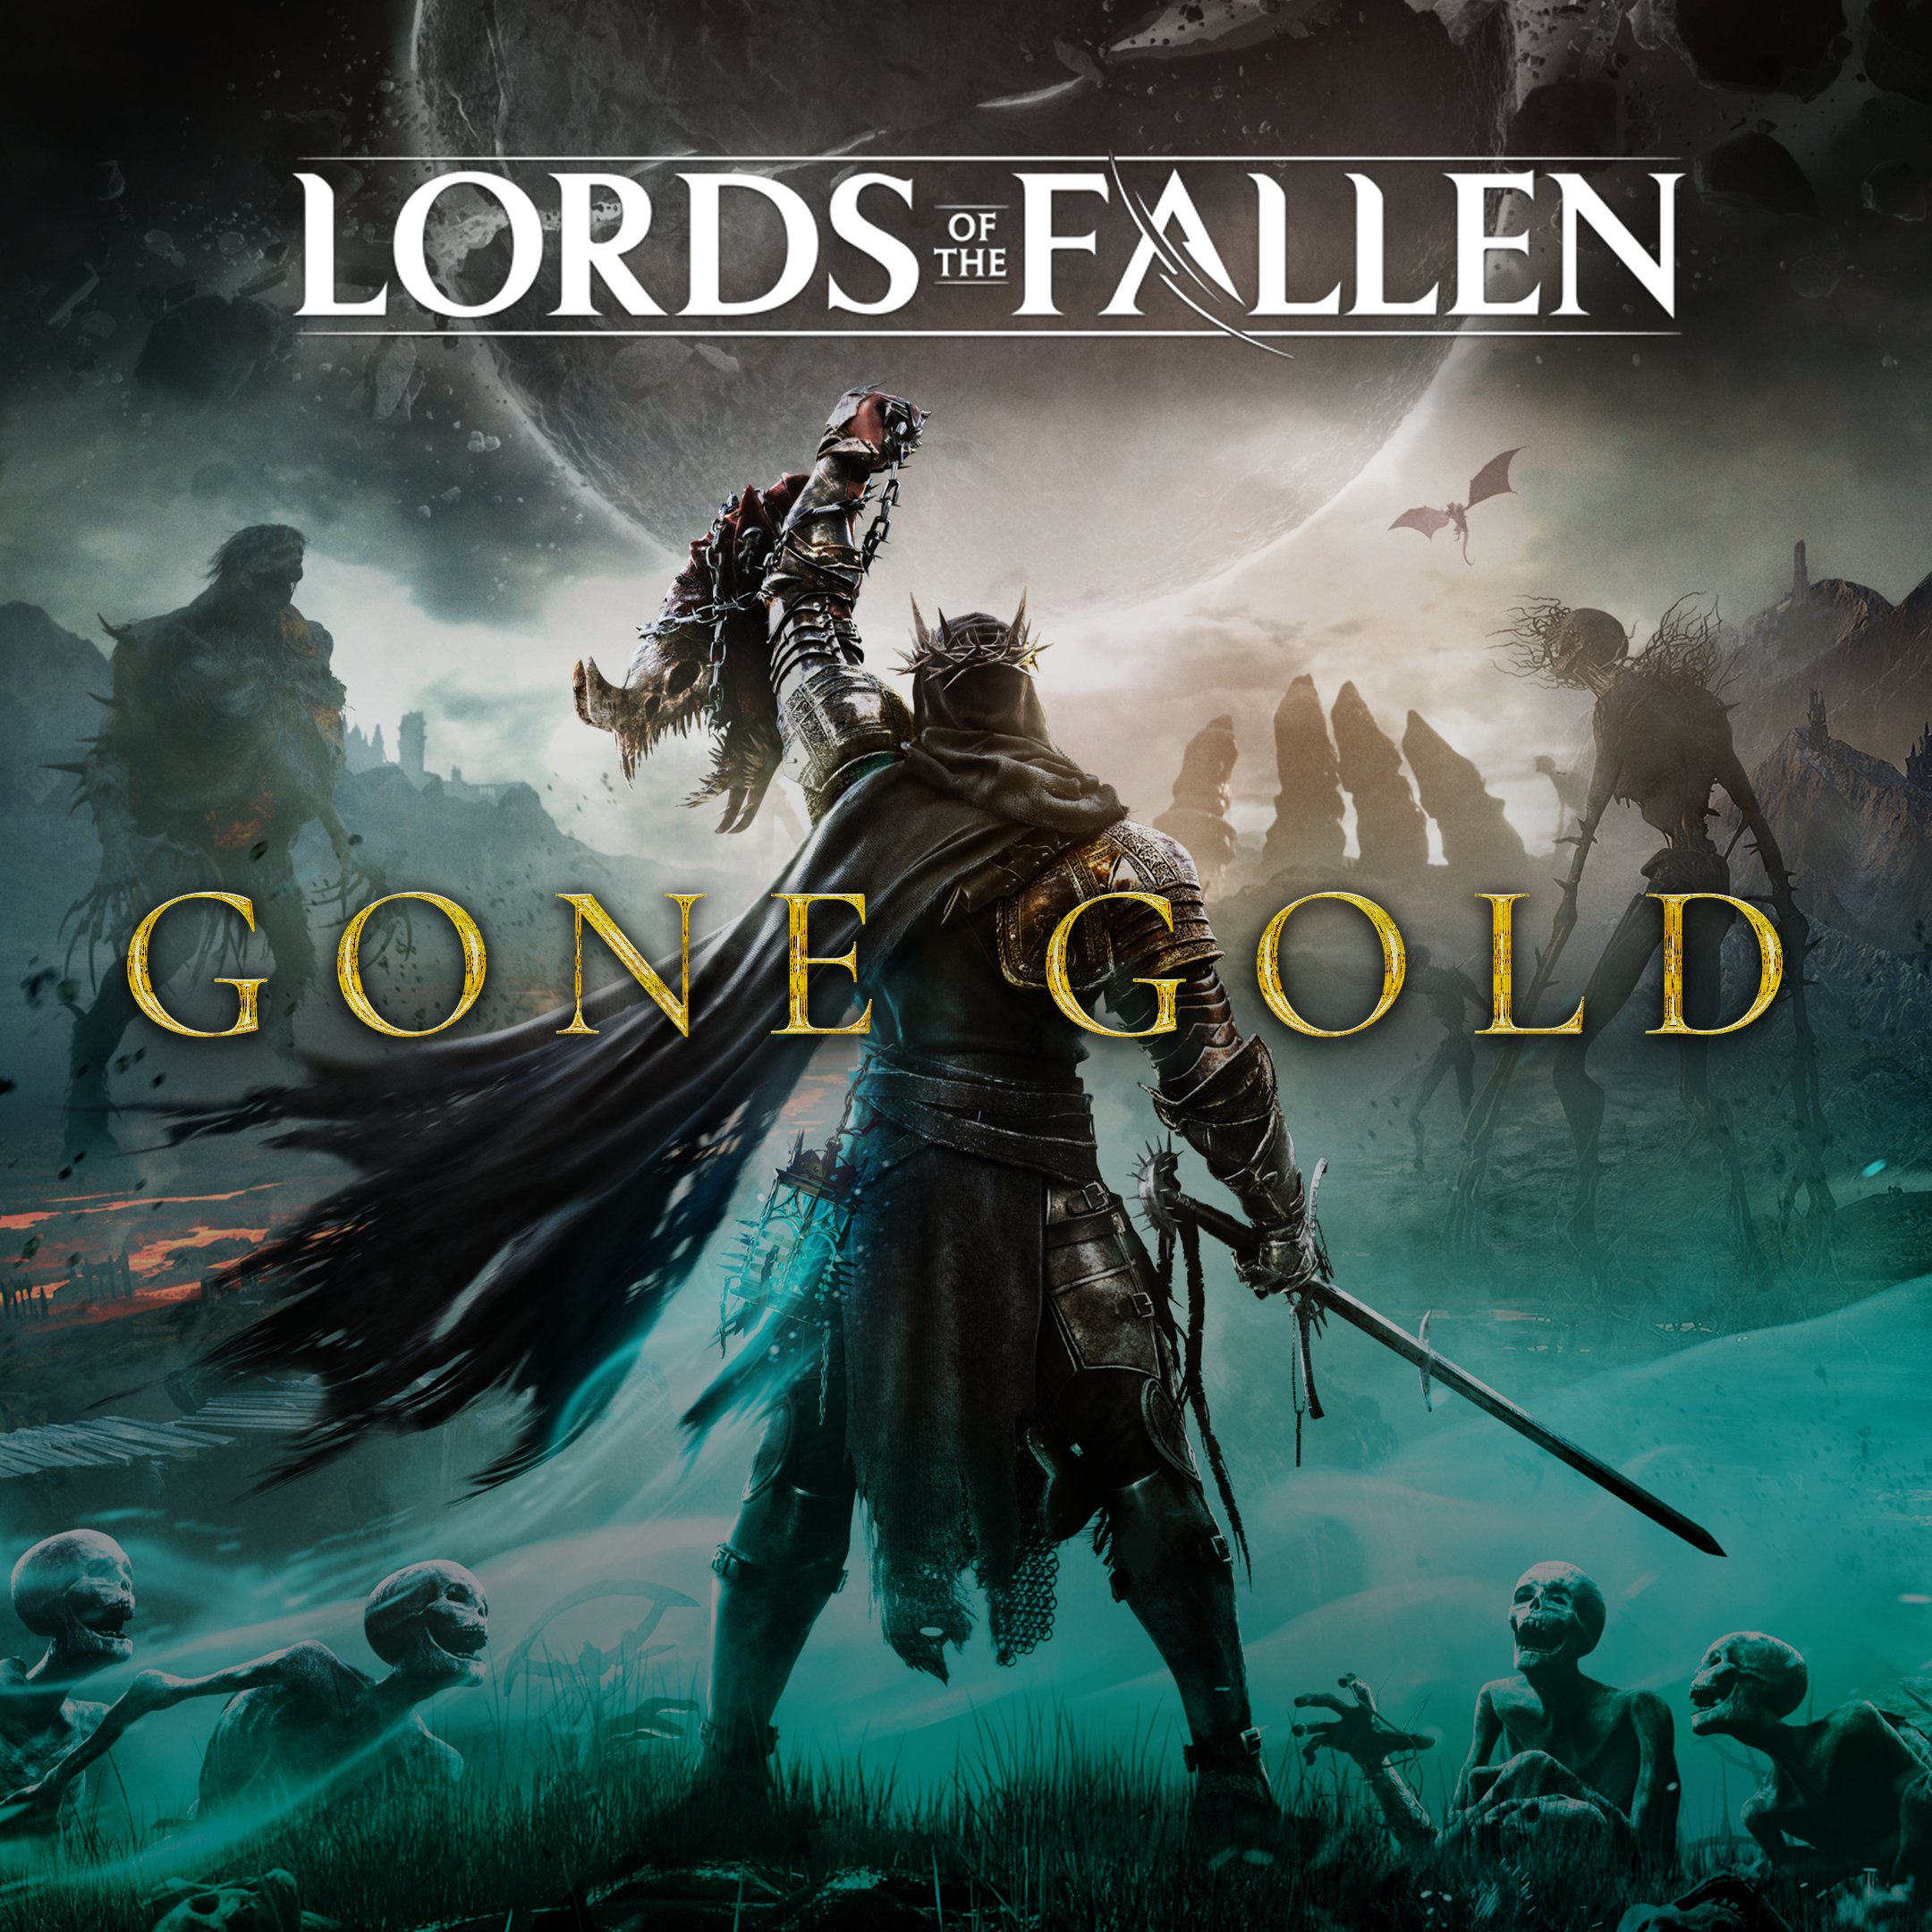 Dark Fantasy Action RPG ‘Lords of the Fallen’ Goes Gold